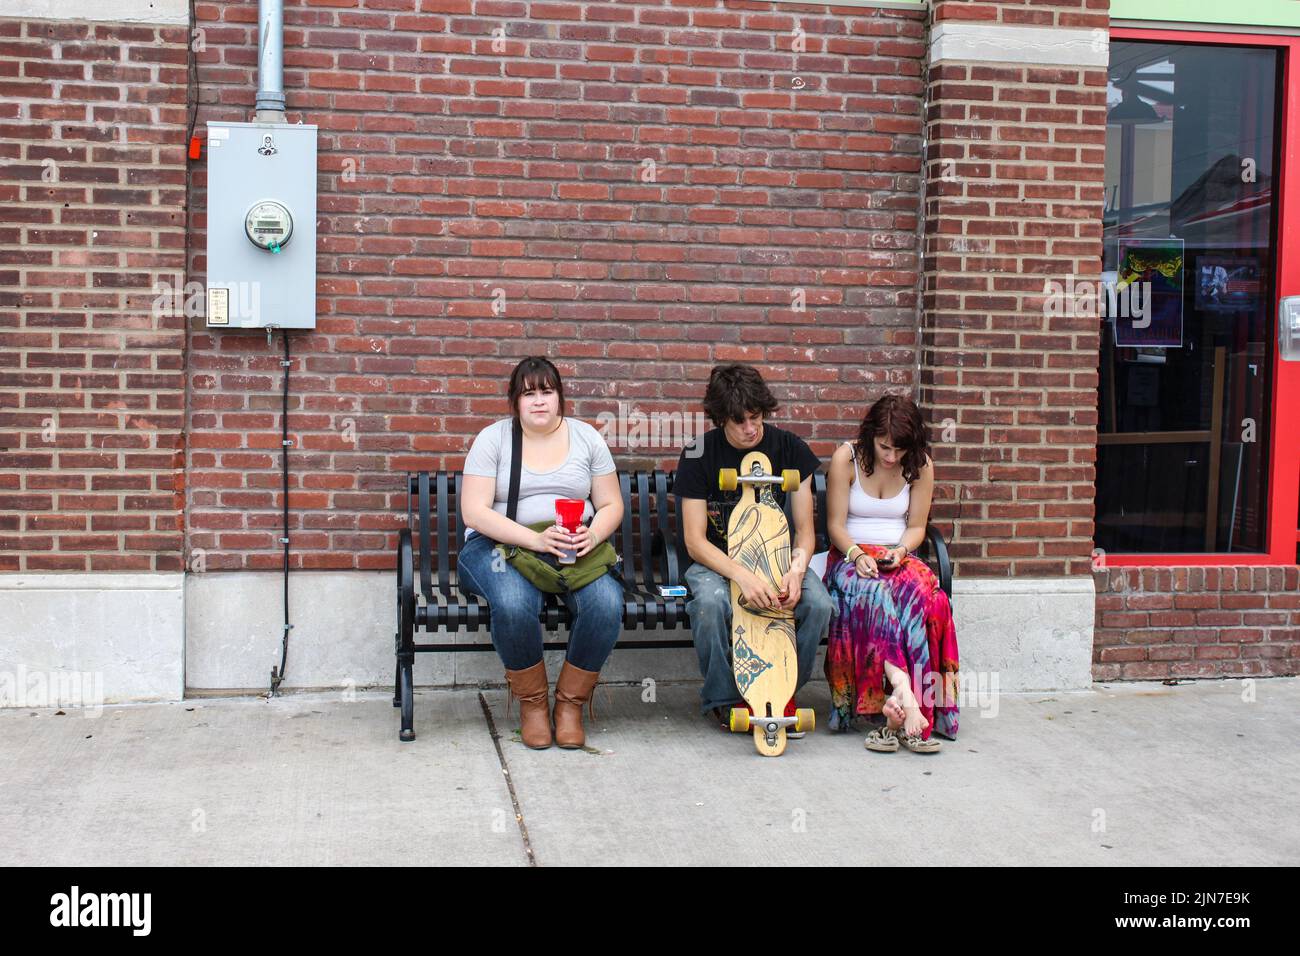 Three young adults sitting on an urban bench - overweight pretty woman - skateboarder with strange expression - girl in tiedyed shirt looking at phone Stock Photo